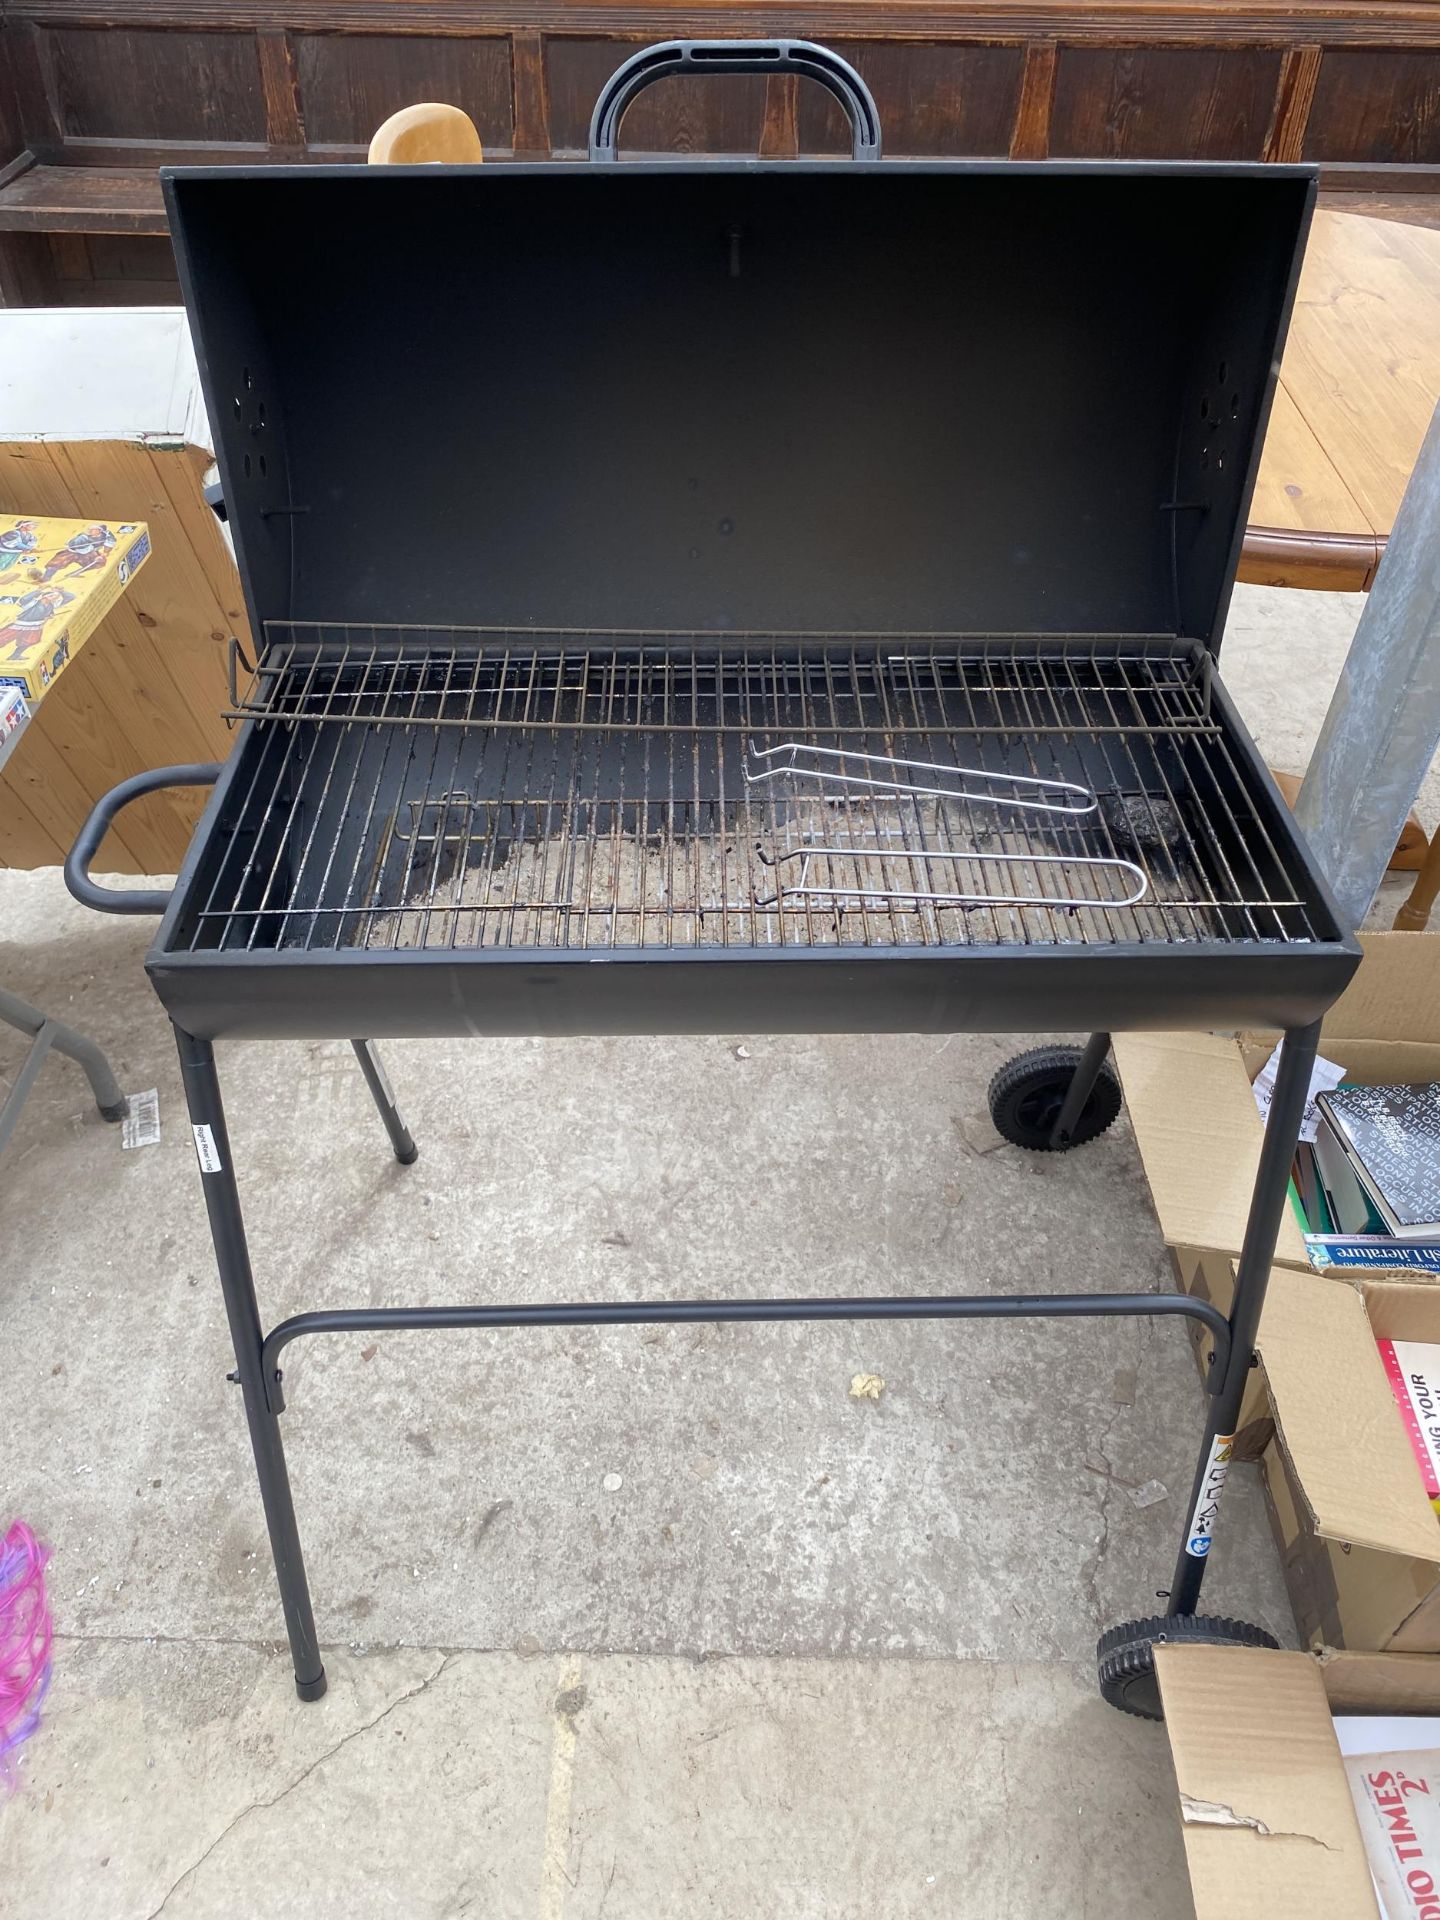 A CHARCOAL BBQ WITH STAND